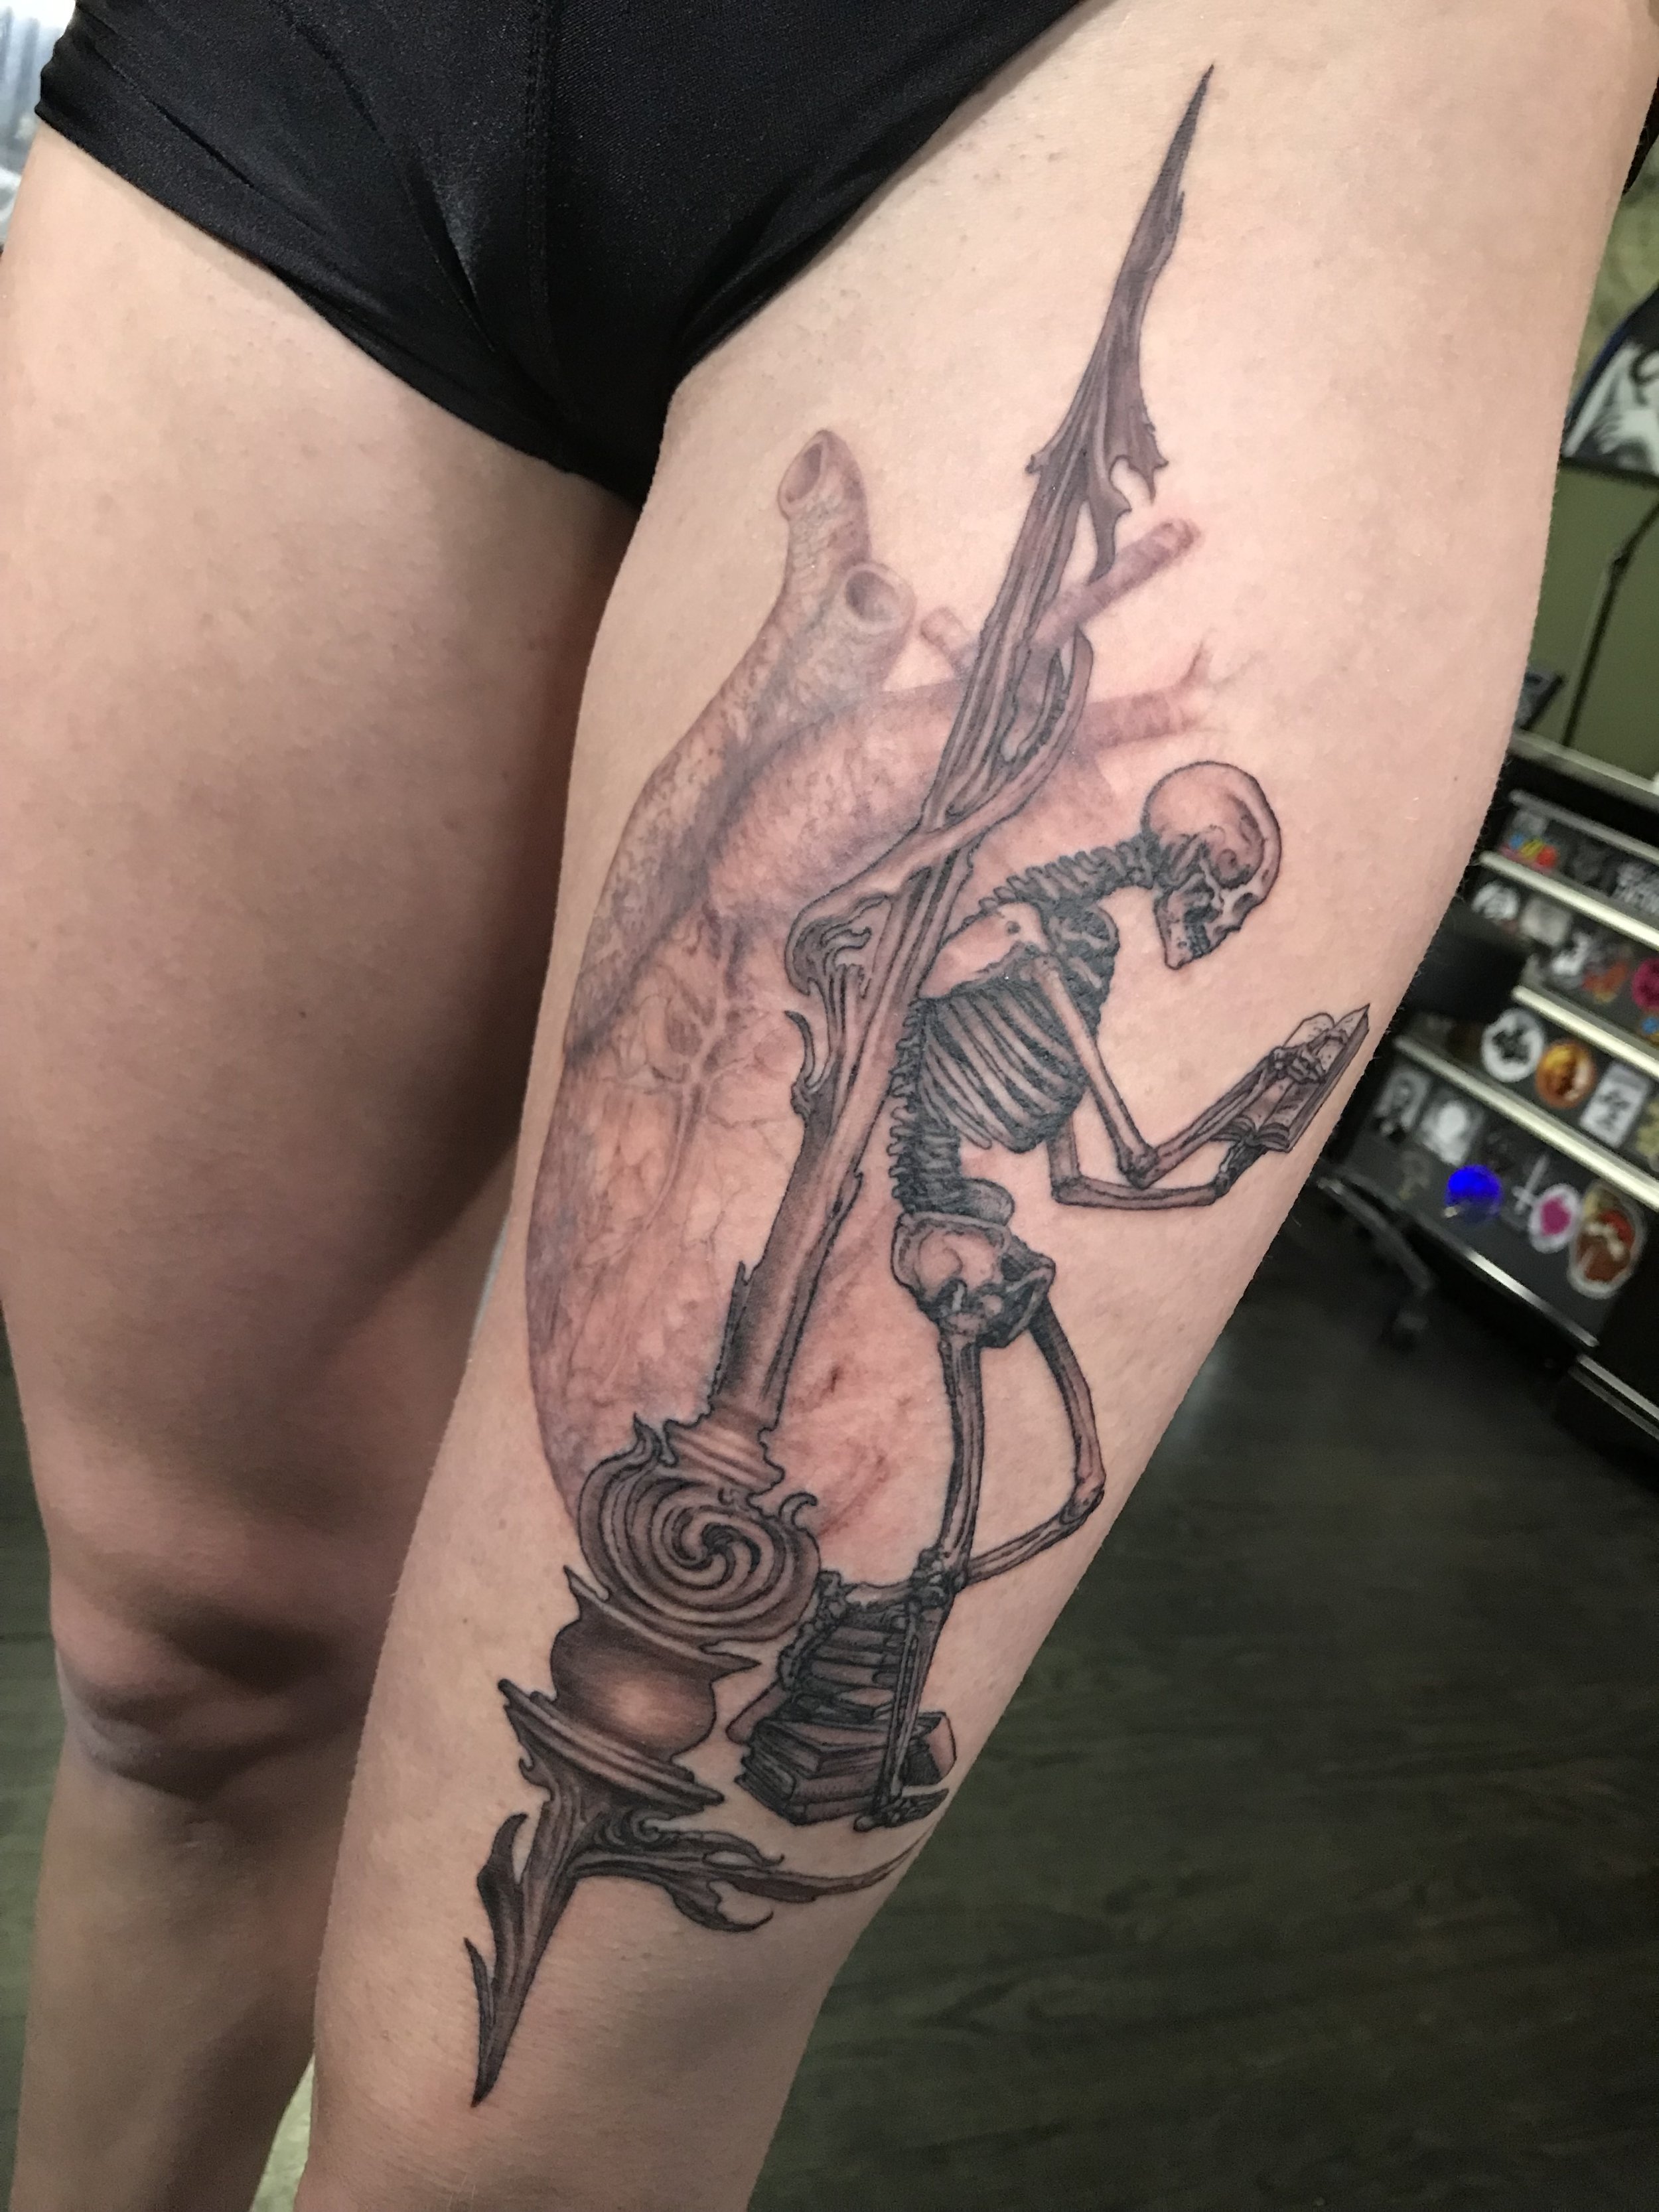 Conspiracy Ink Tattoos  Abstract Don Quixote tribute tattoo with  watercolor splashes done by Libby conspiracyinktattoos ladytattooist  donquixotetattoo watercolortattoo abstracttattoo  Facebook